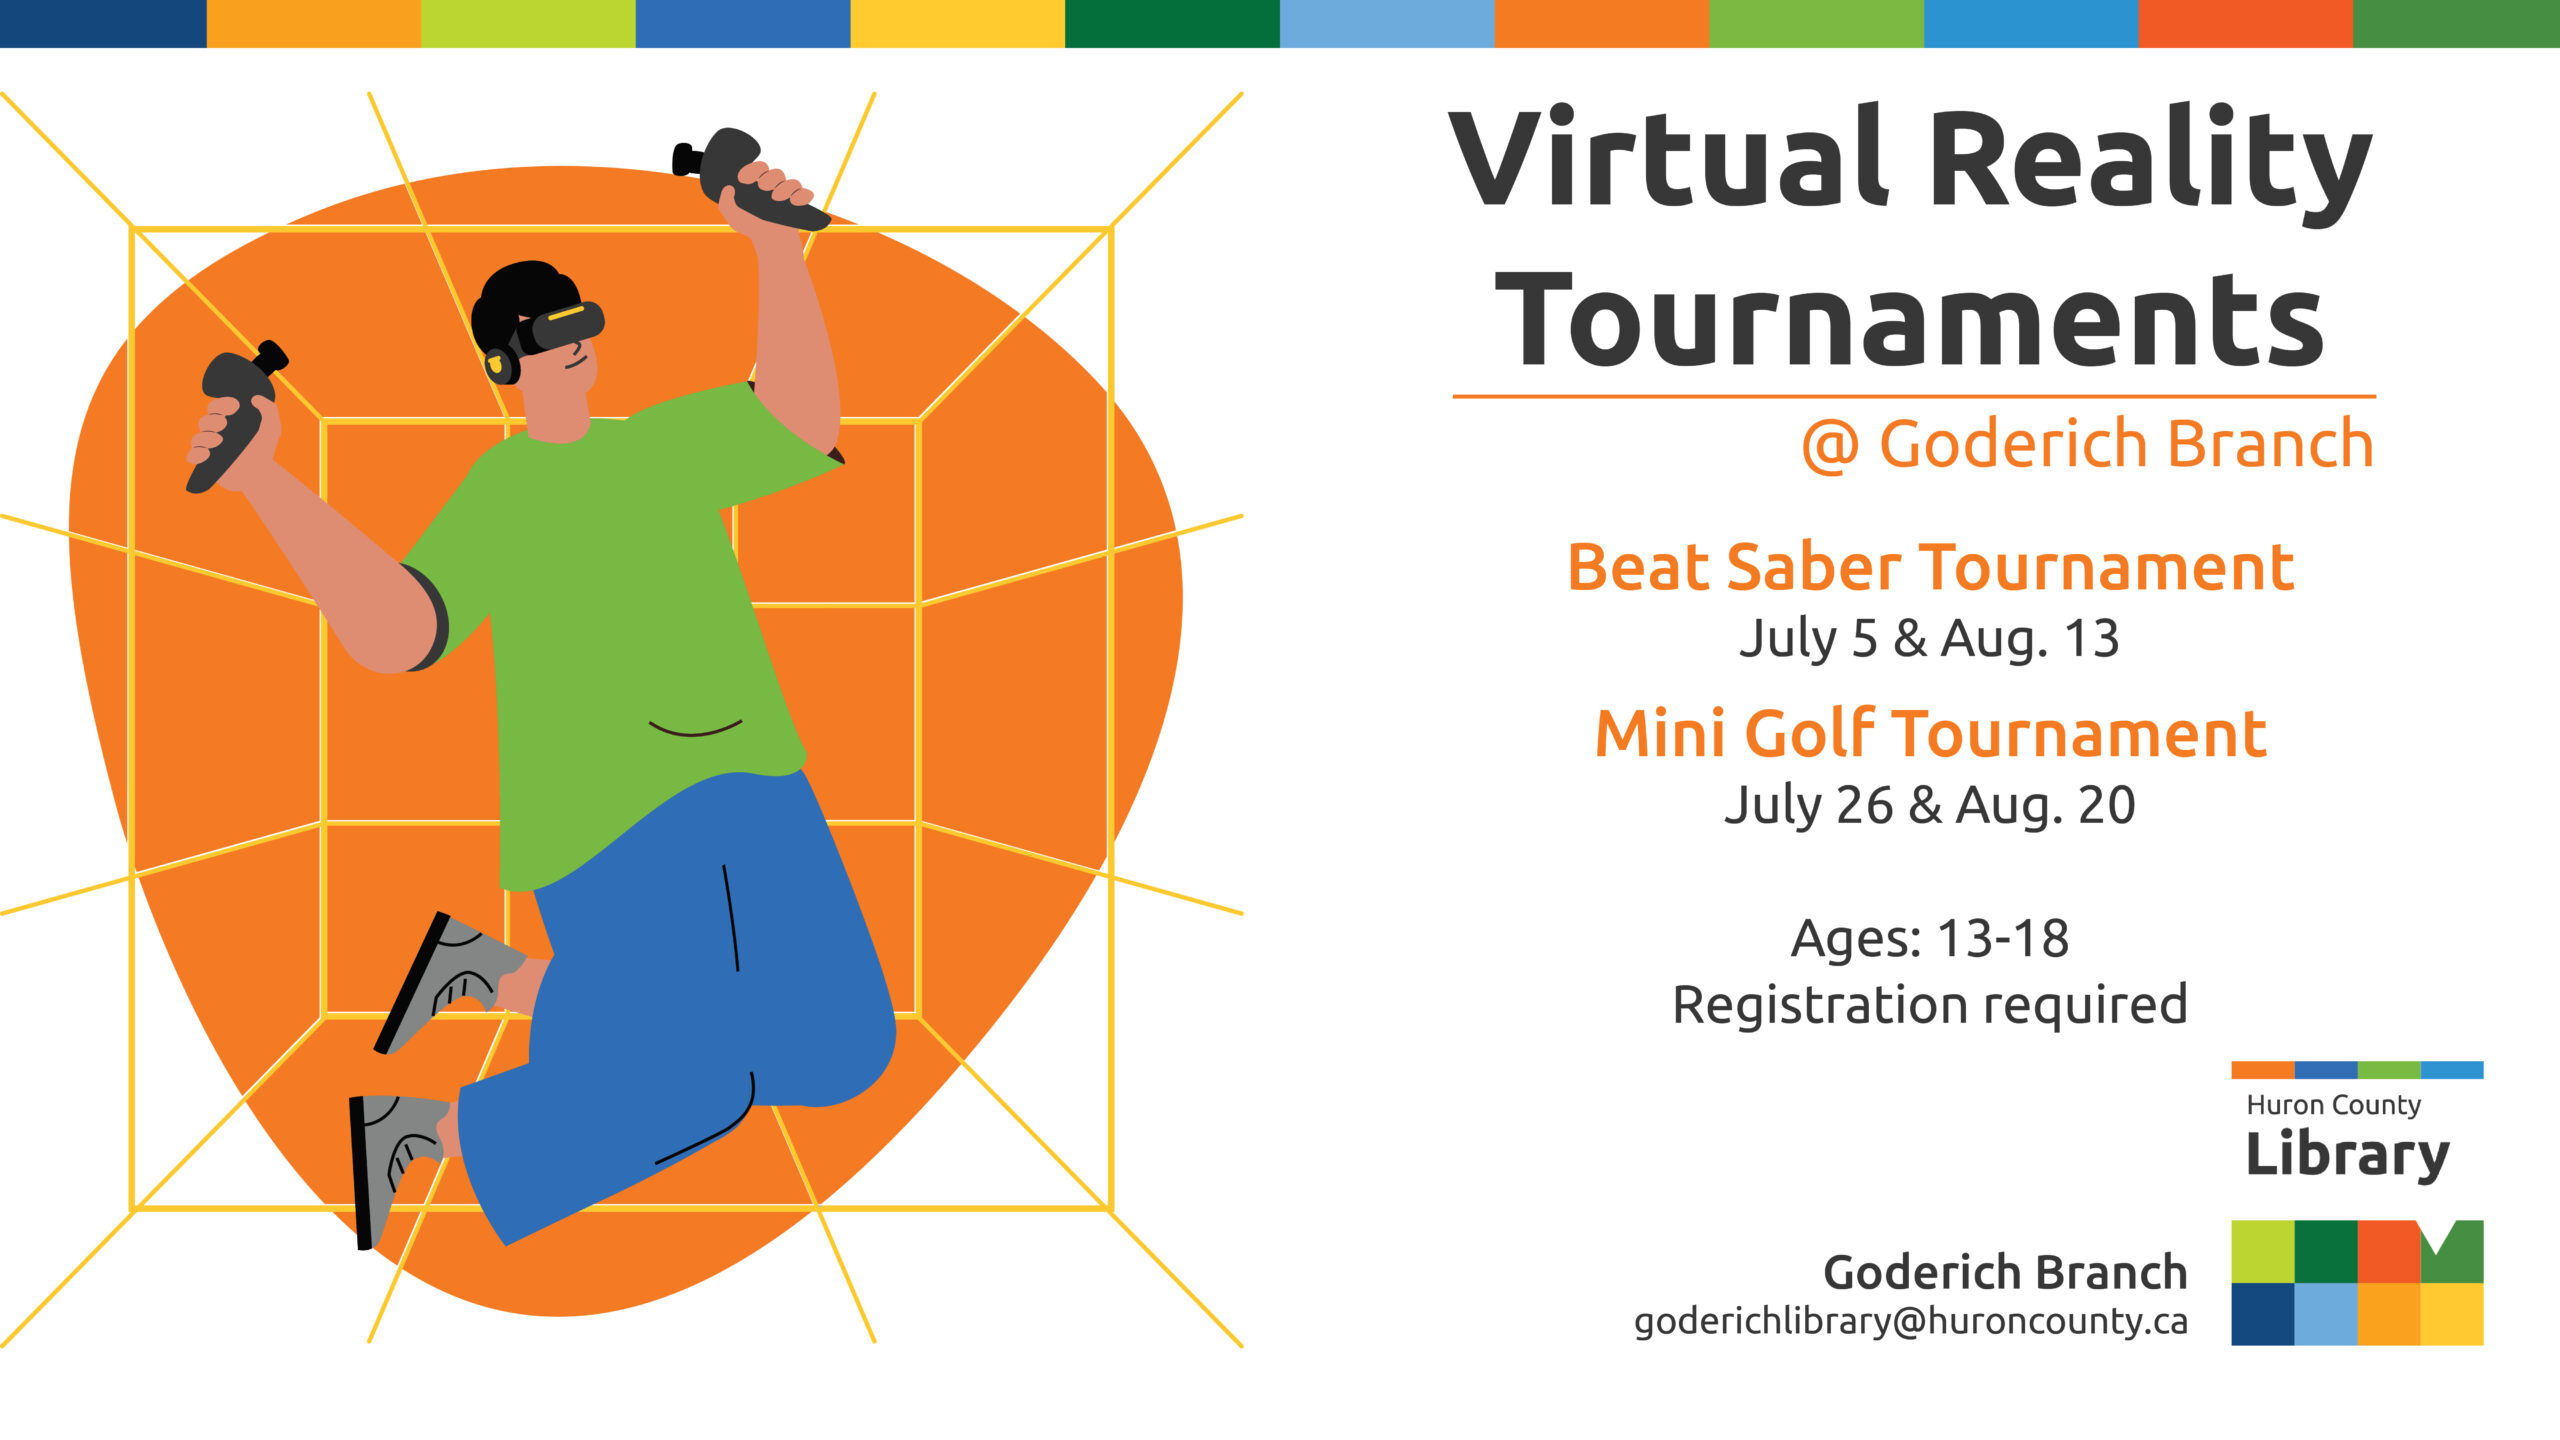 Illustration of a teen wearing virtual reality headset with text promoting virtual reality tournaments at Goderich